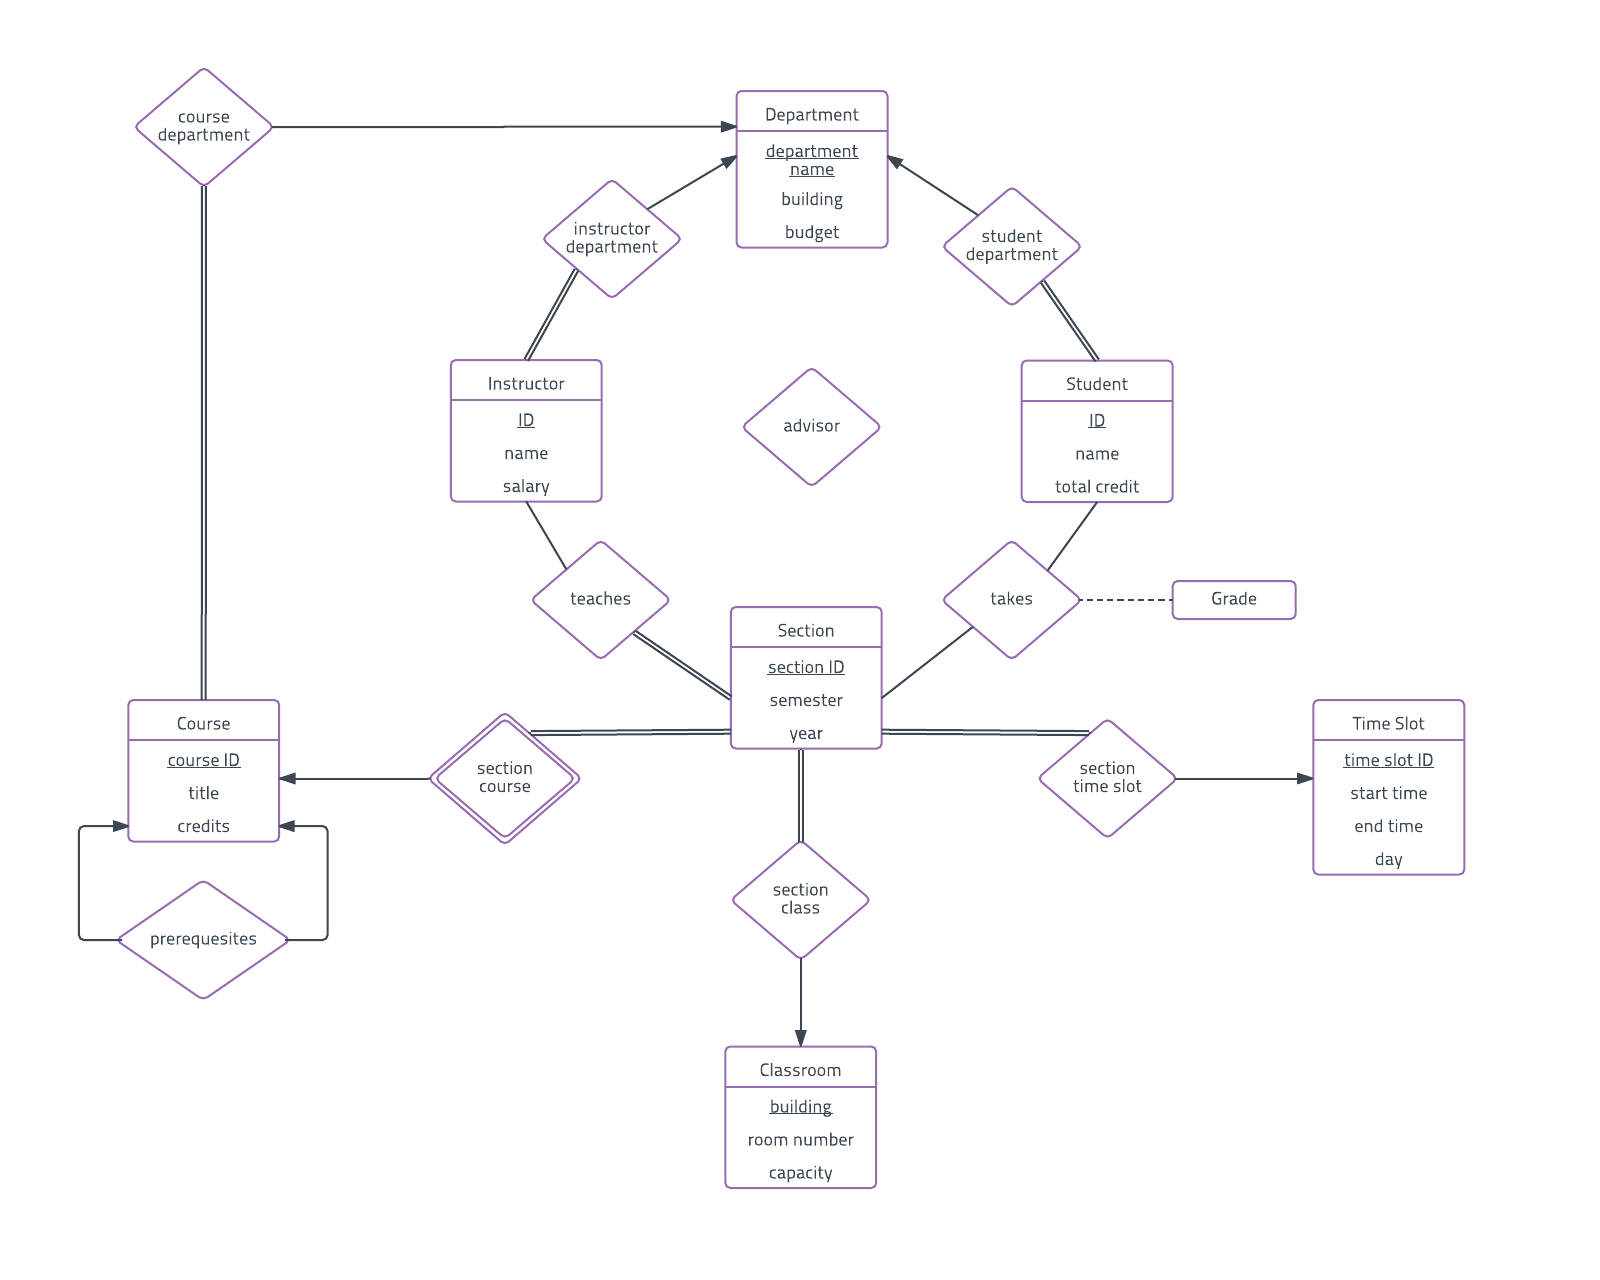 Er Diagram Examples And Templates | Lucidchart pertaining to Er Diagram Examples+Library Management System